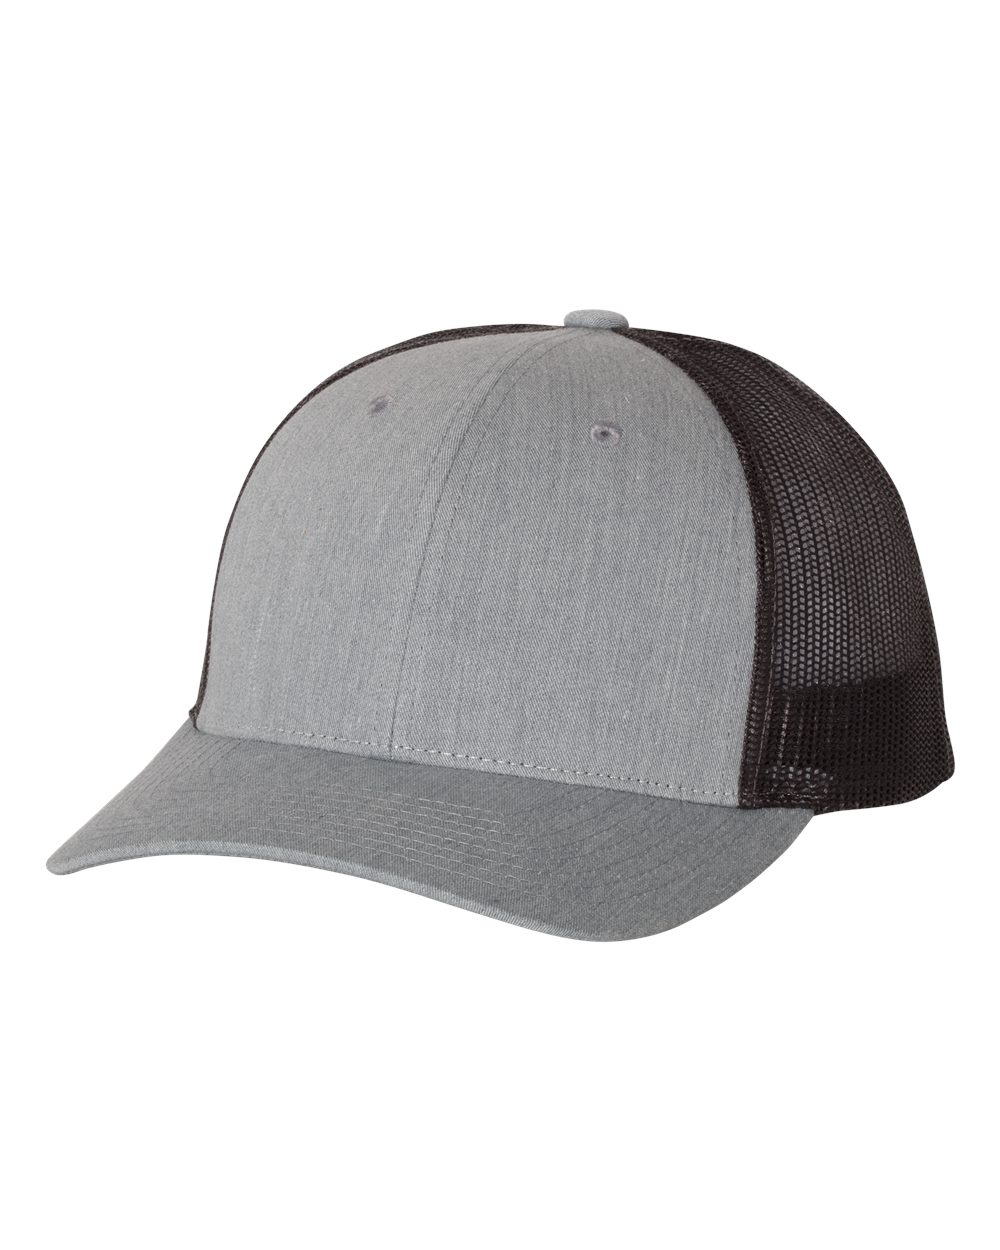 click to view Heather Grey/ Dark Charcoal